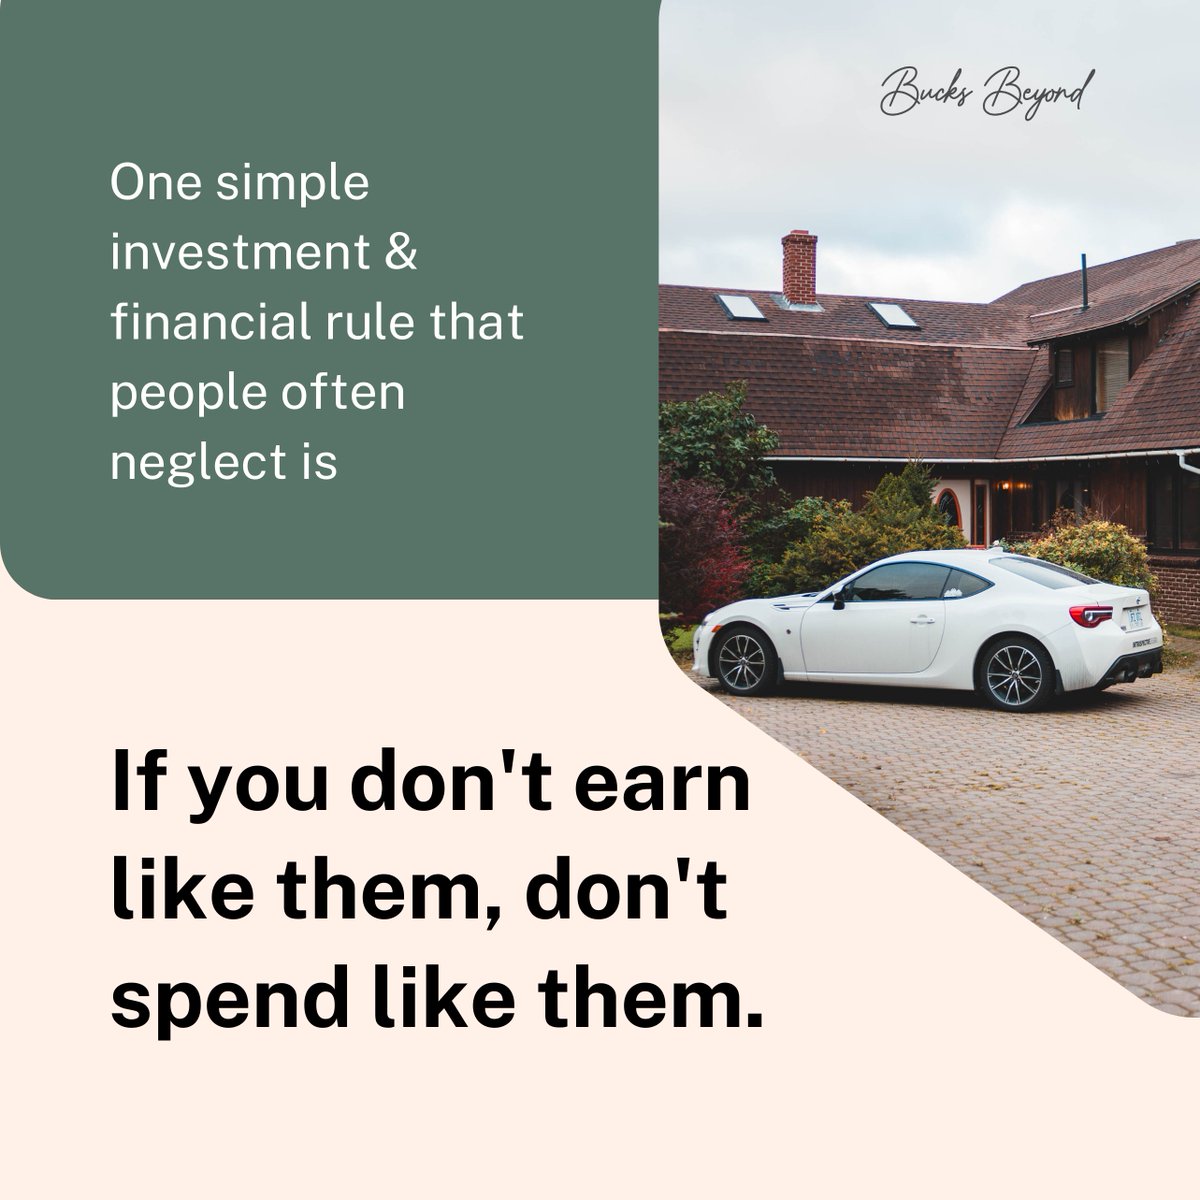 Why follow someone else's financial path when you can pave your own? Remember, true wealth is about finding a future you can be proud of.
Tell us one financial goal you're working towards this year!

#smartspending #financialfreedom #livewithinmeans #budgetsmart #wealthbuilding